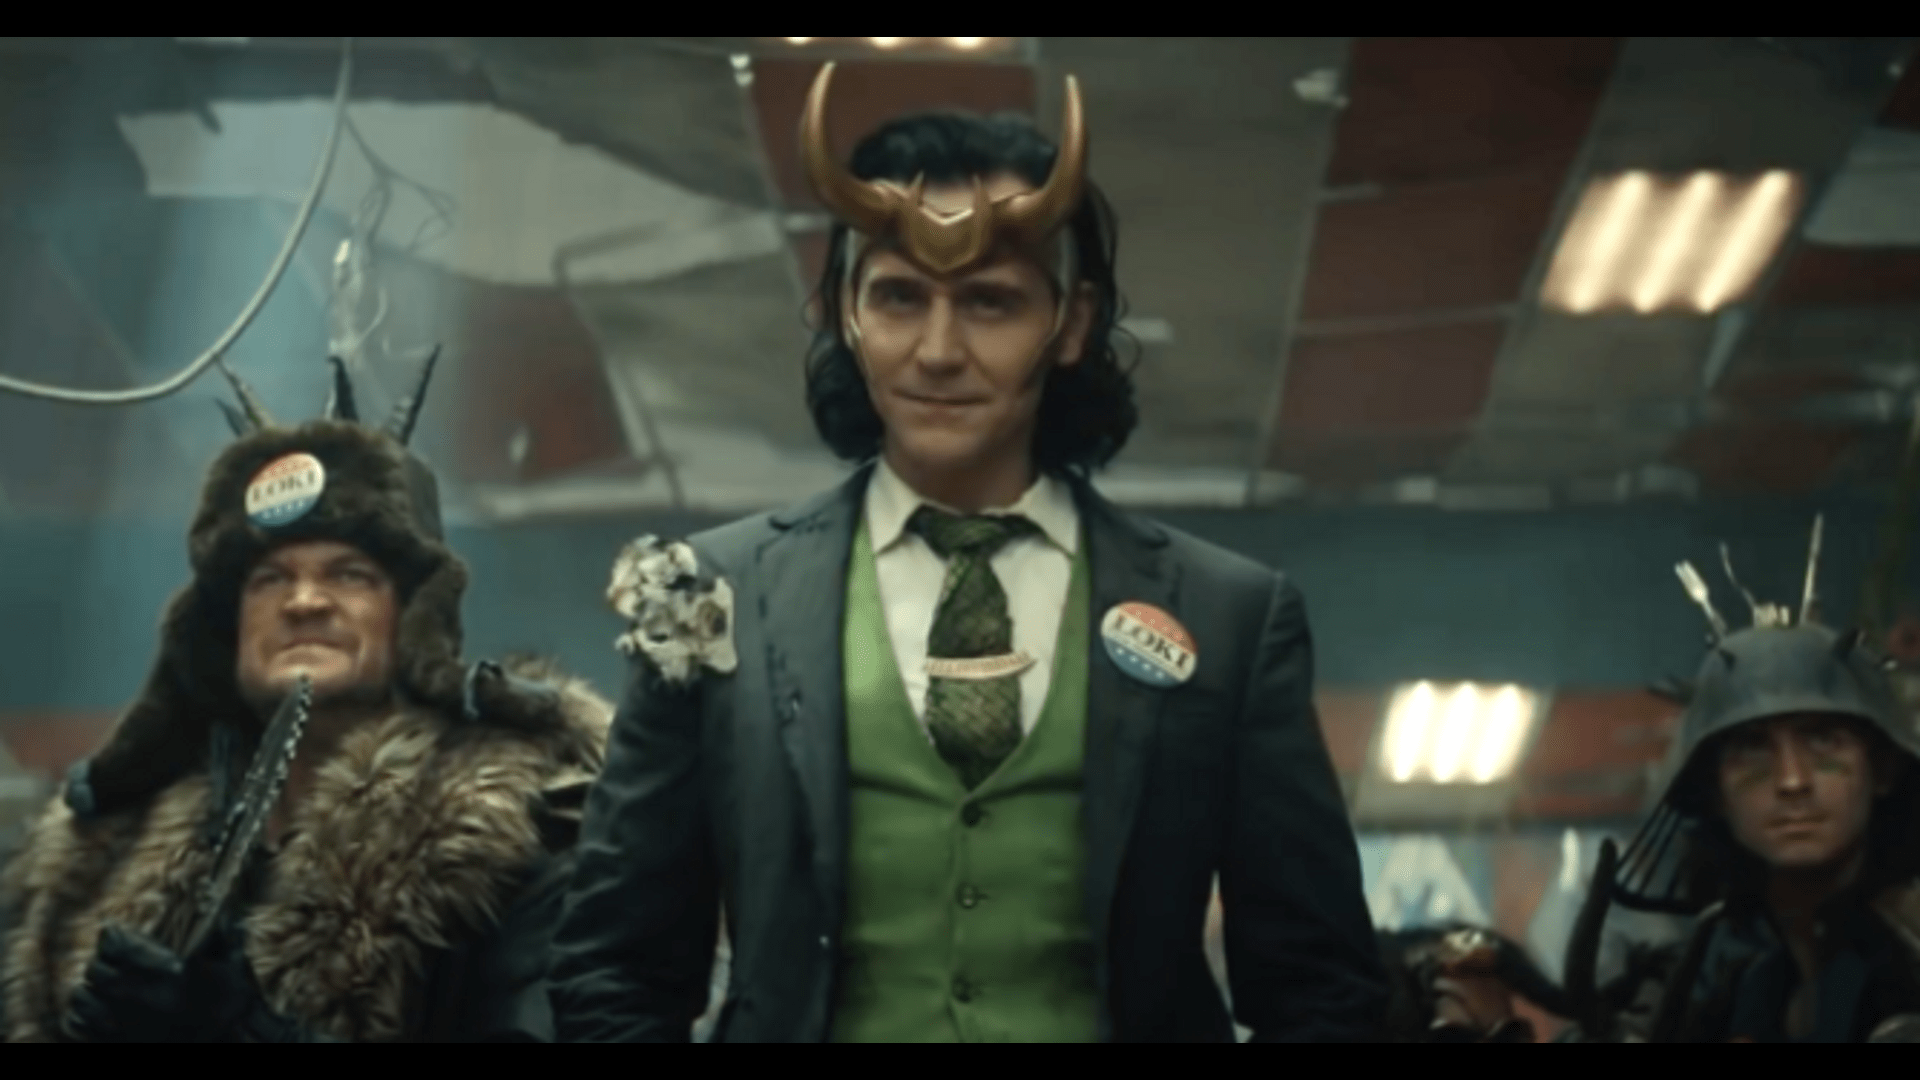 'Loki' continues as the most-watched Marvel series on Disney +